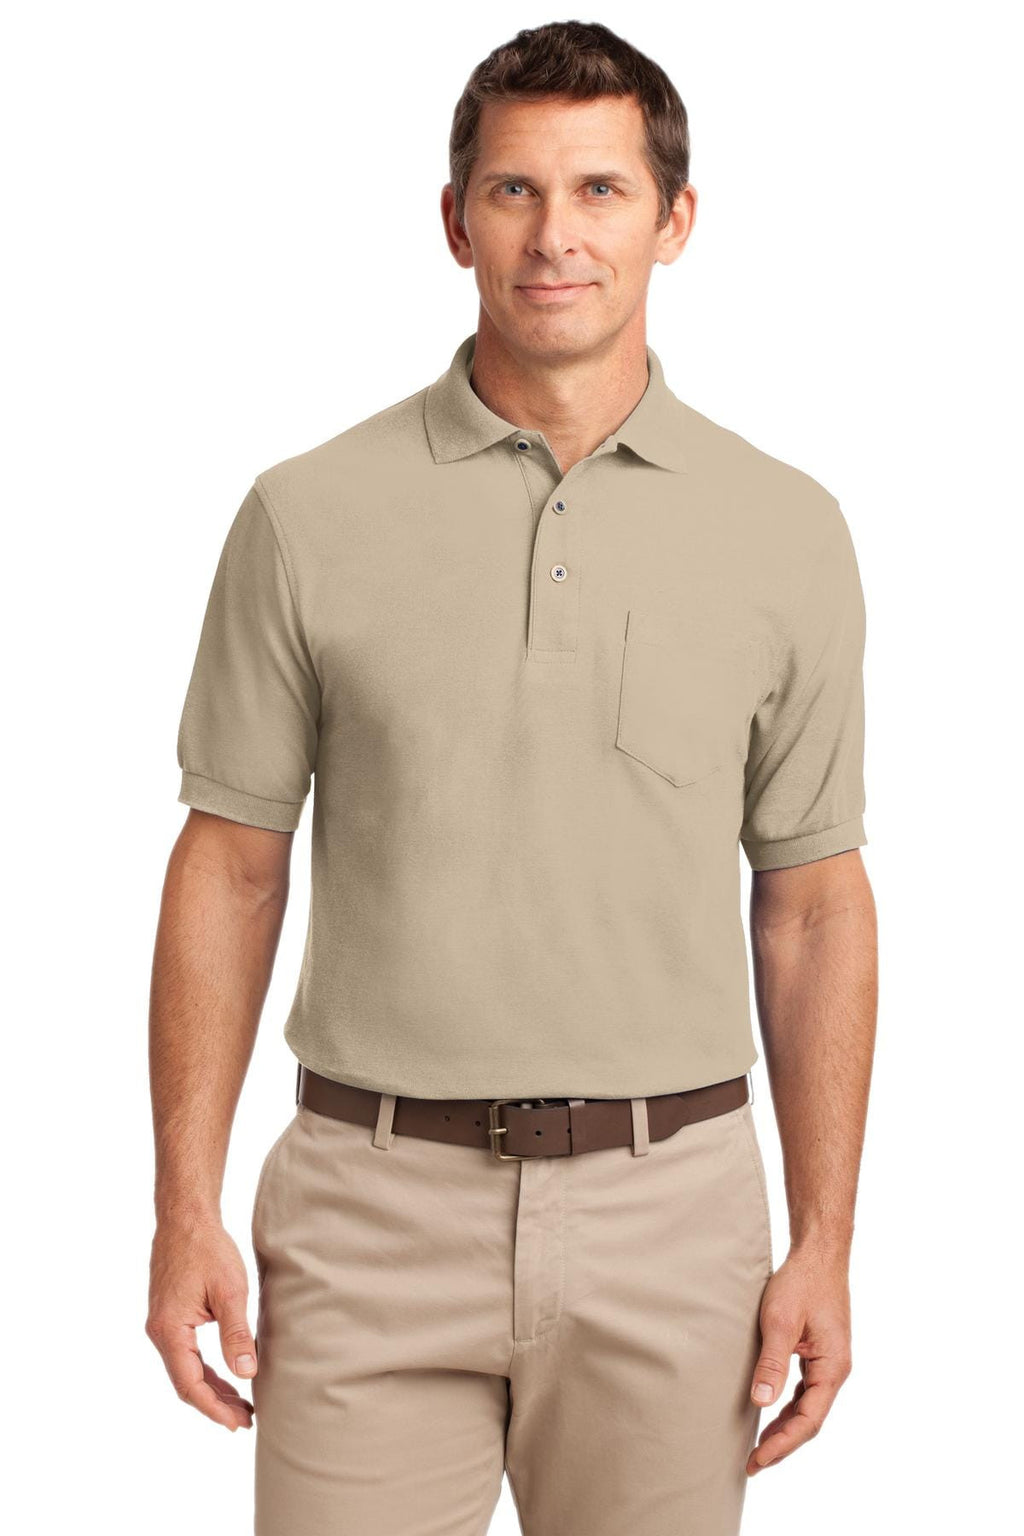 Port Authority Men's Silk Touch Polo Shirt With Pocket-9